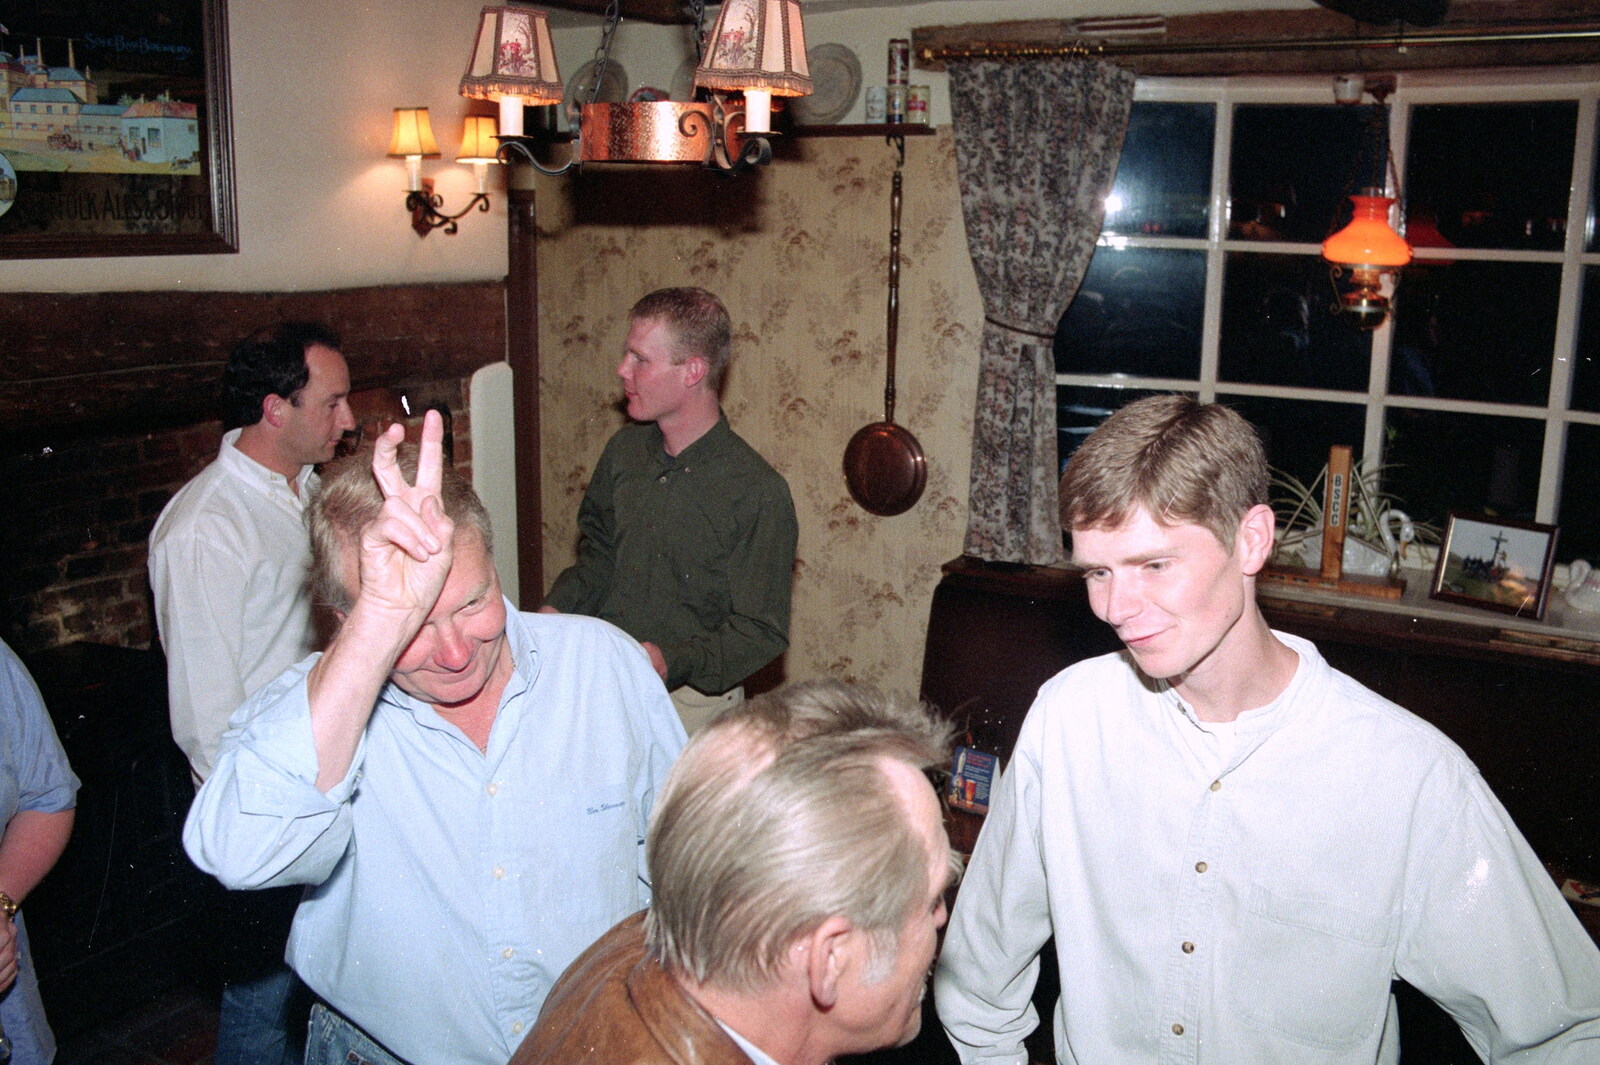 John Willy does rabbit ears from Wavy's Thirtieth Birthday, The Swan Inn, Brome, Suffolk - 24th May 2000